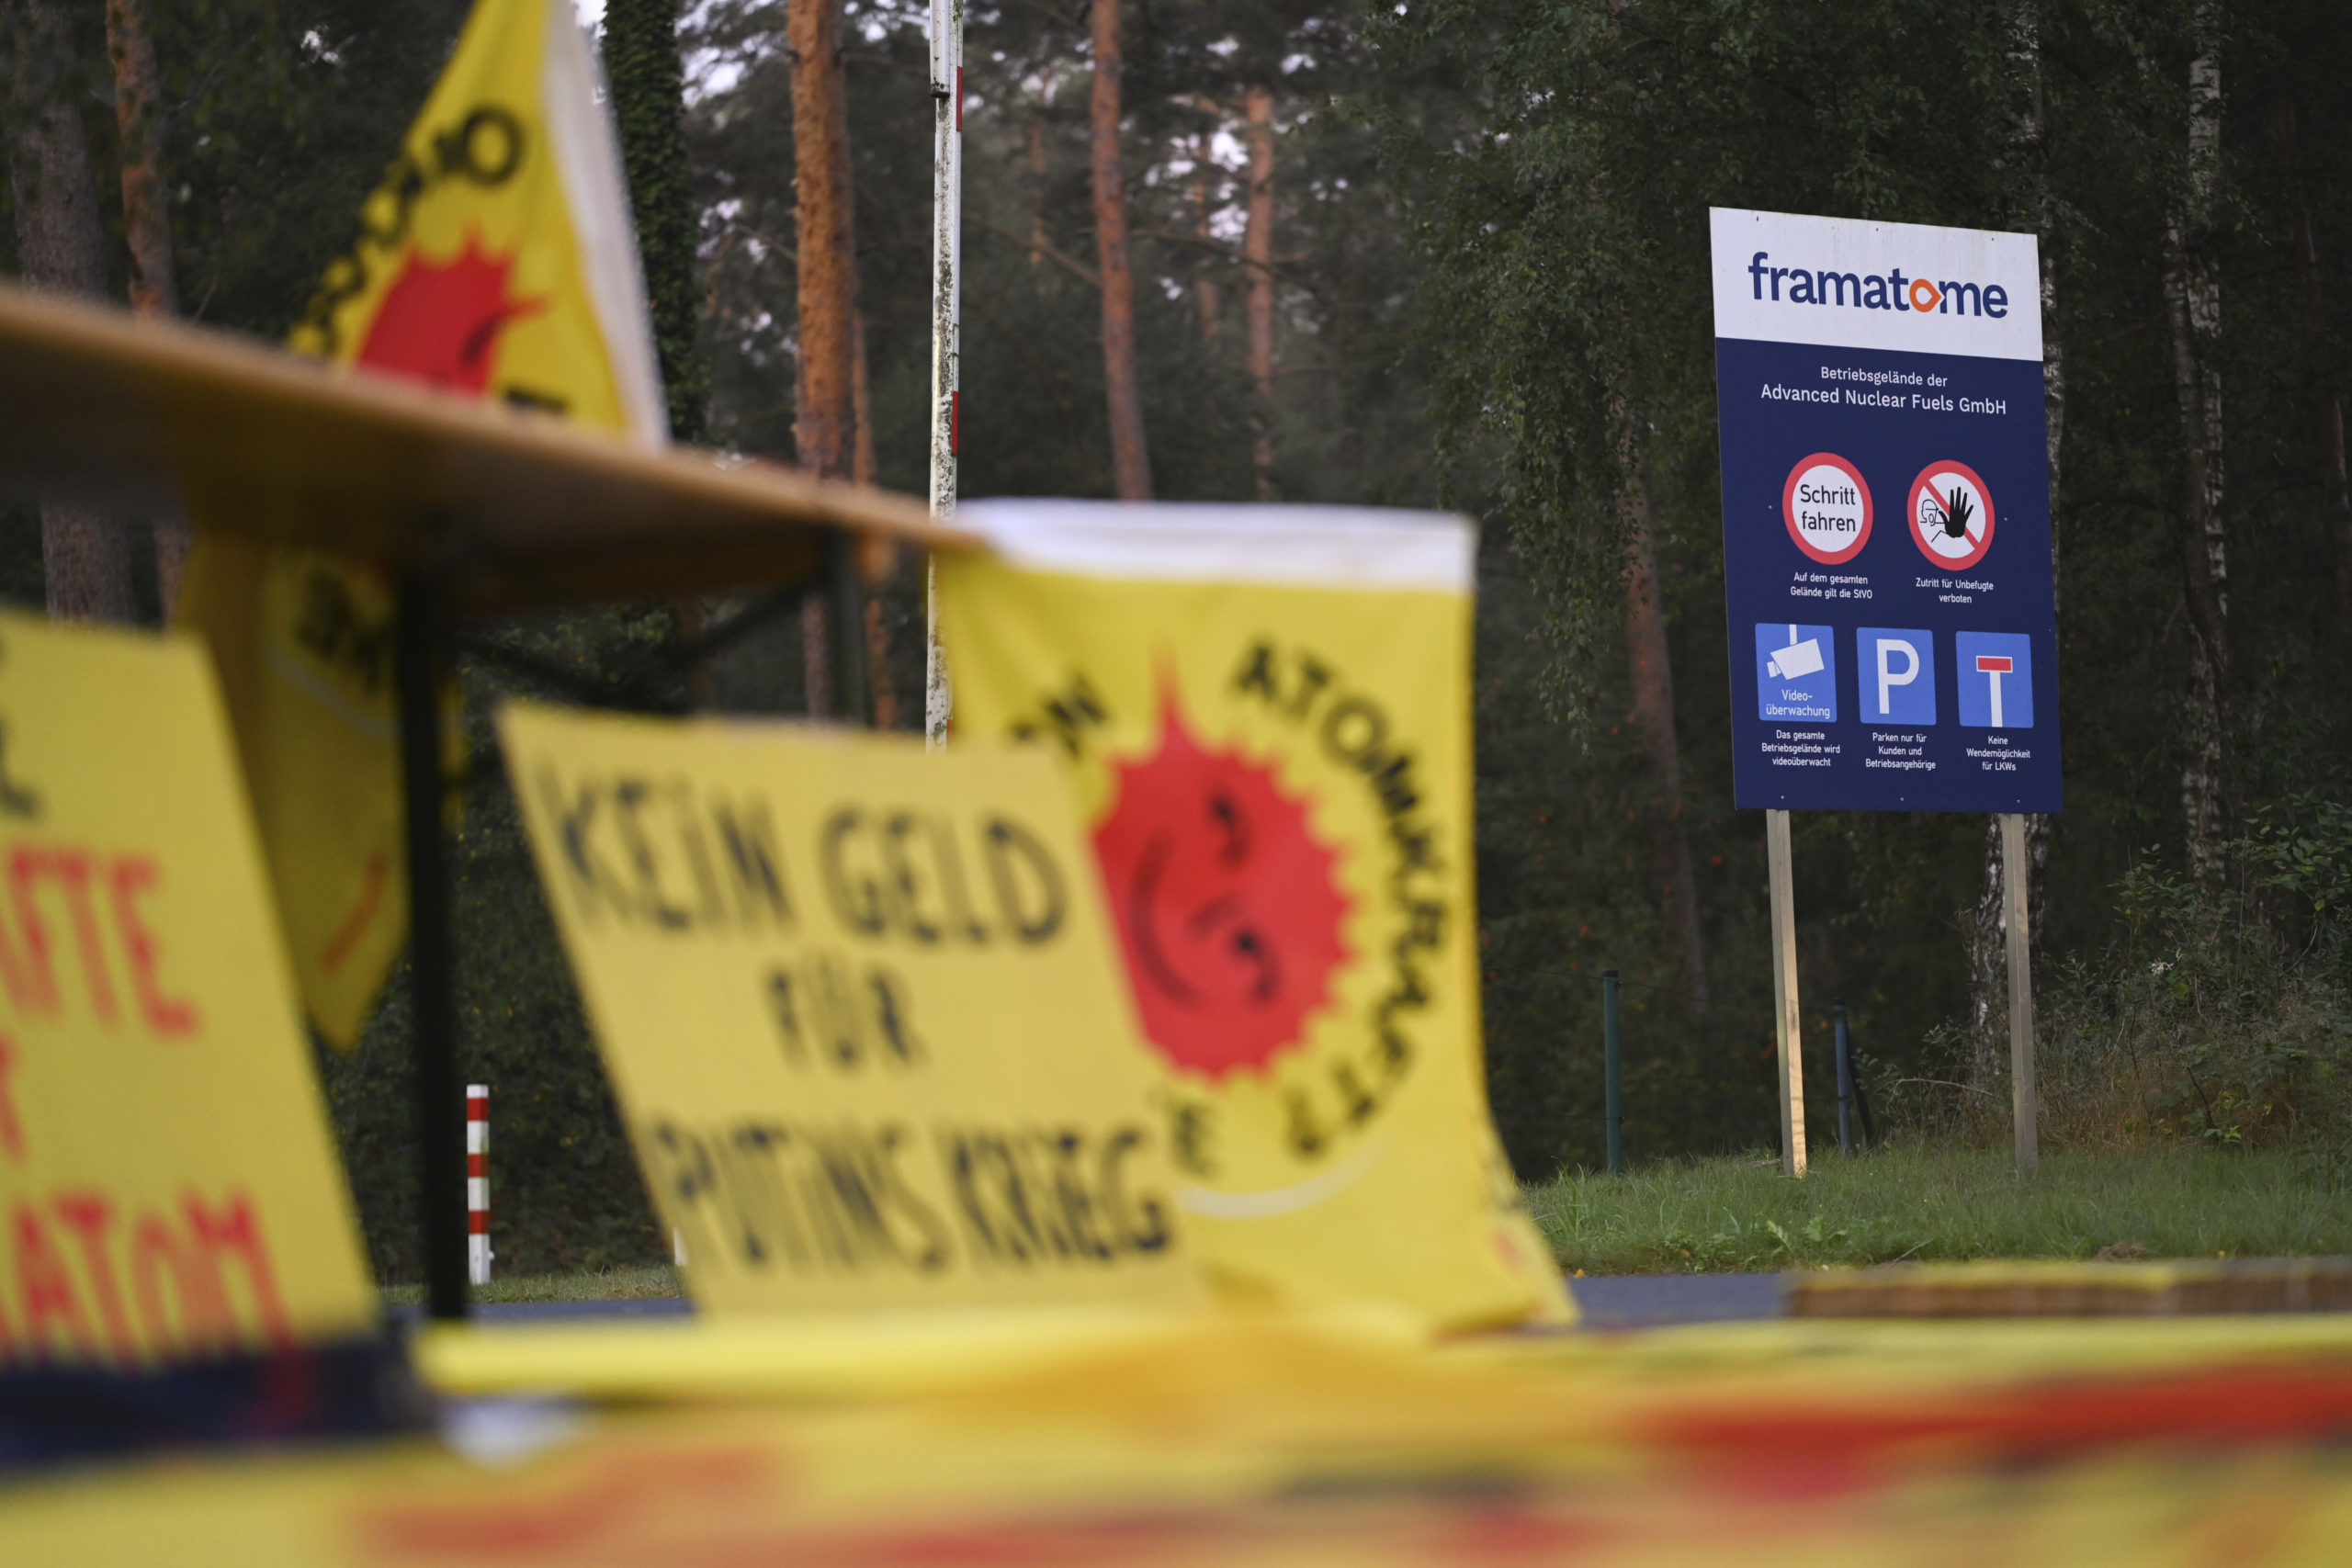 Protest posters are seen outside the fuel element fabrication plant of the Framatome company in Lingen, Germany, on Monday, after the Germany government said it would not be able to stop Russia from shipping uranium through the country and processing it at a site in Germany.